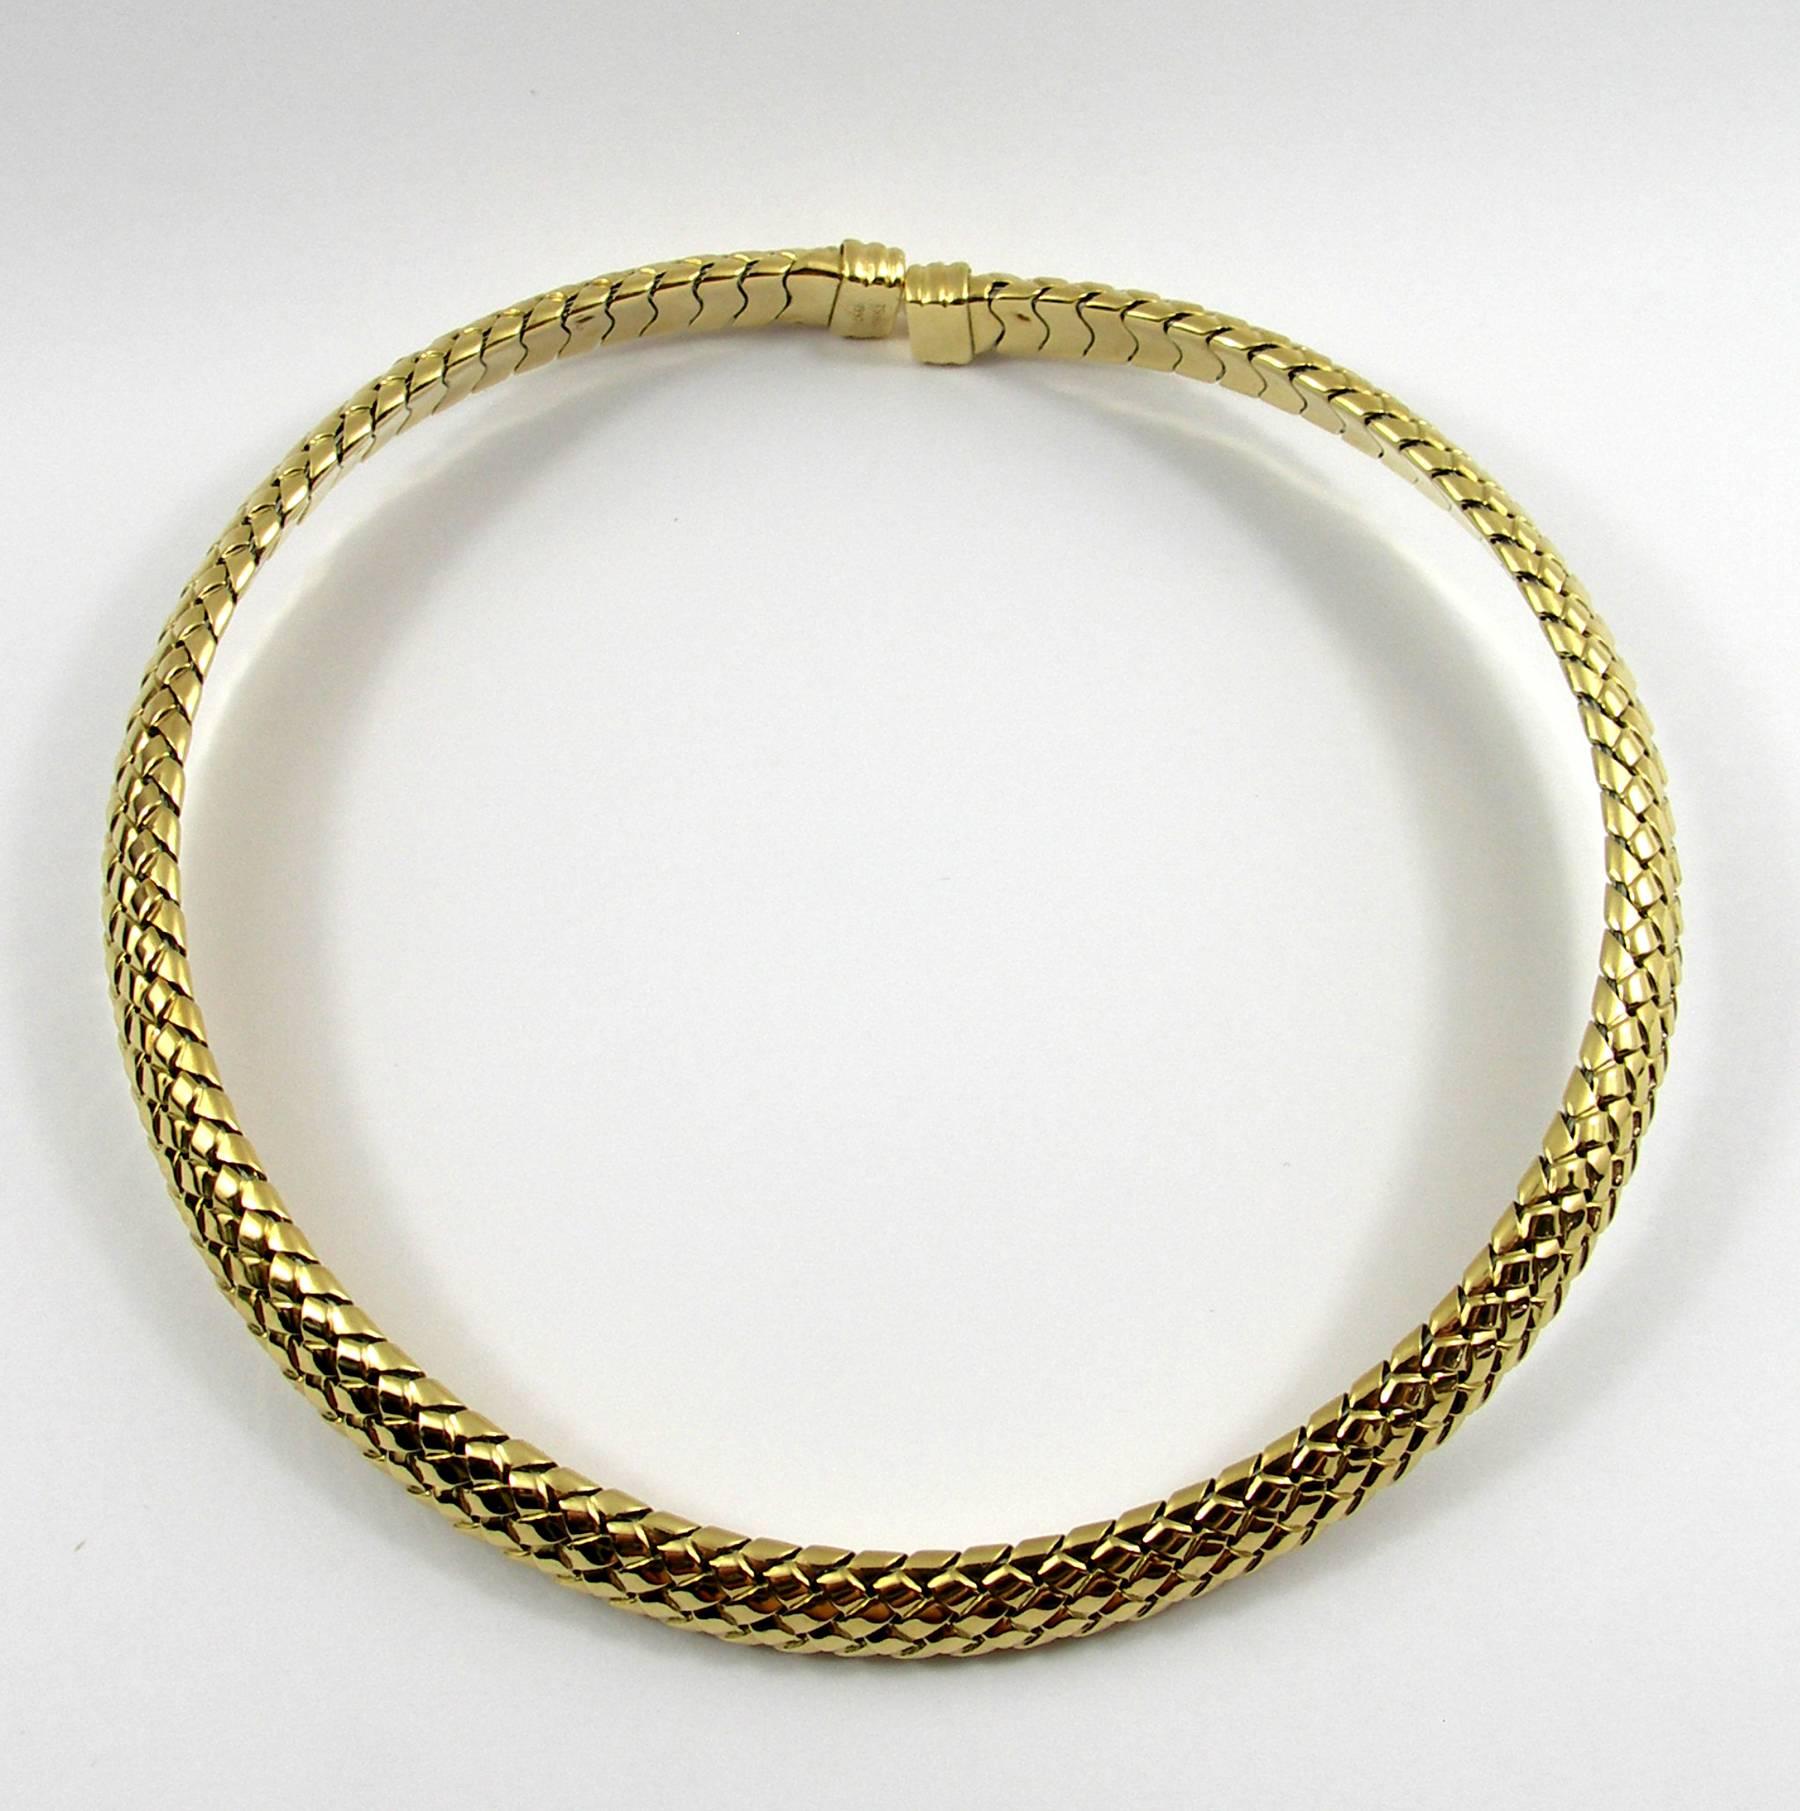 An 18Kt. woven design, collar necklace measuring 10mm wide, with a circumference of 13 inches signed Tiffany & Co.